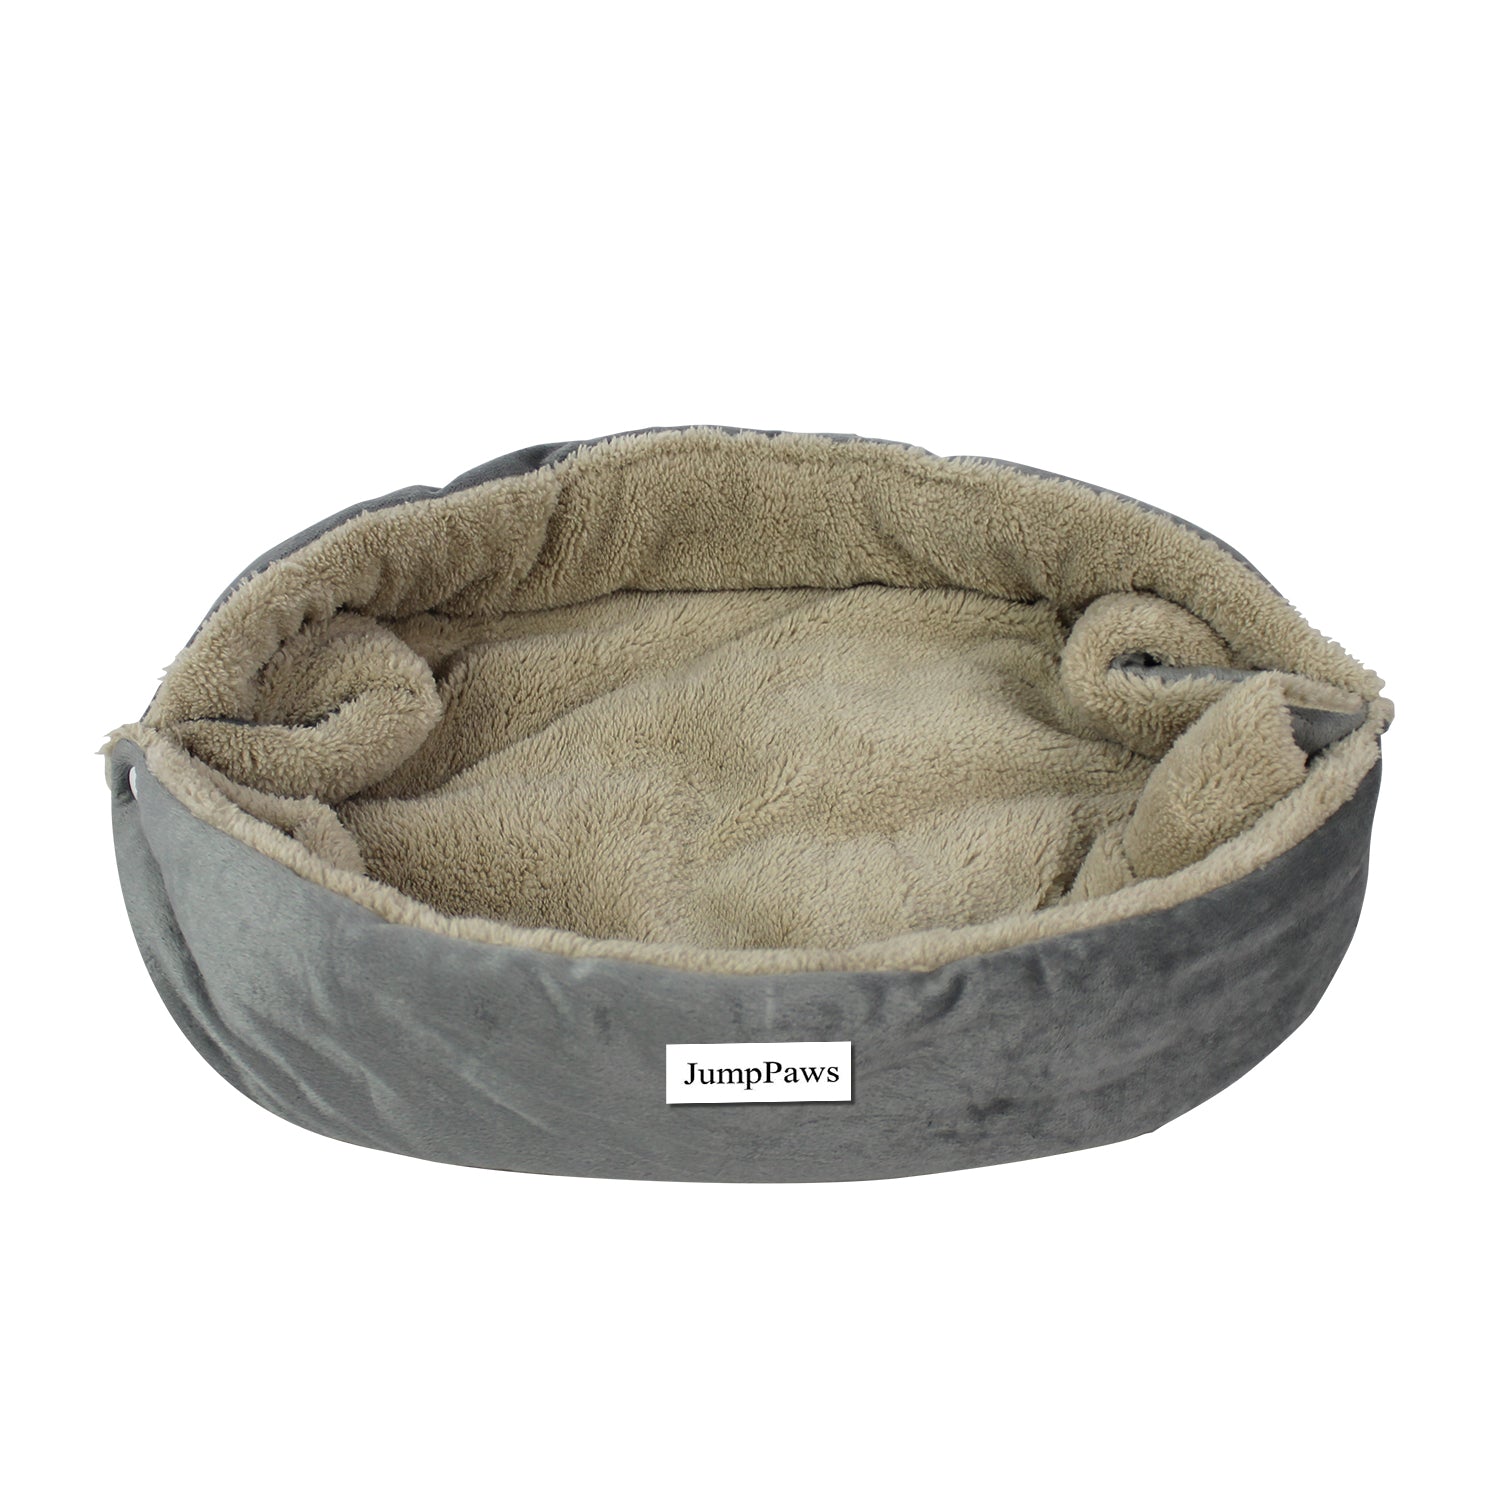 JumpPaws Portable Dog Beds, Comfortable Doggy beds for Medium Dogs, Green & Grey